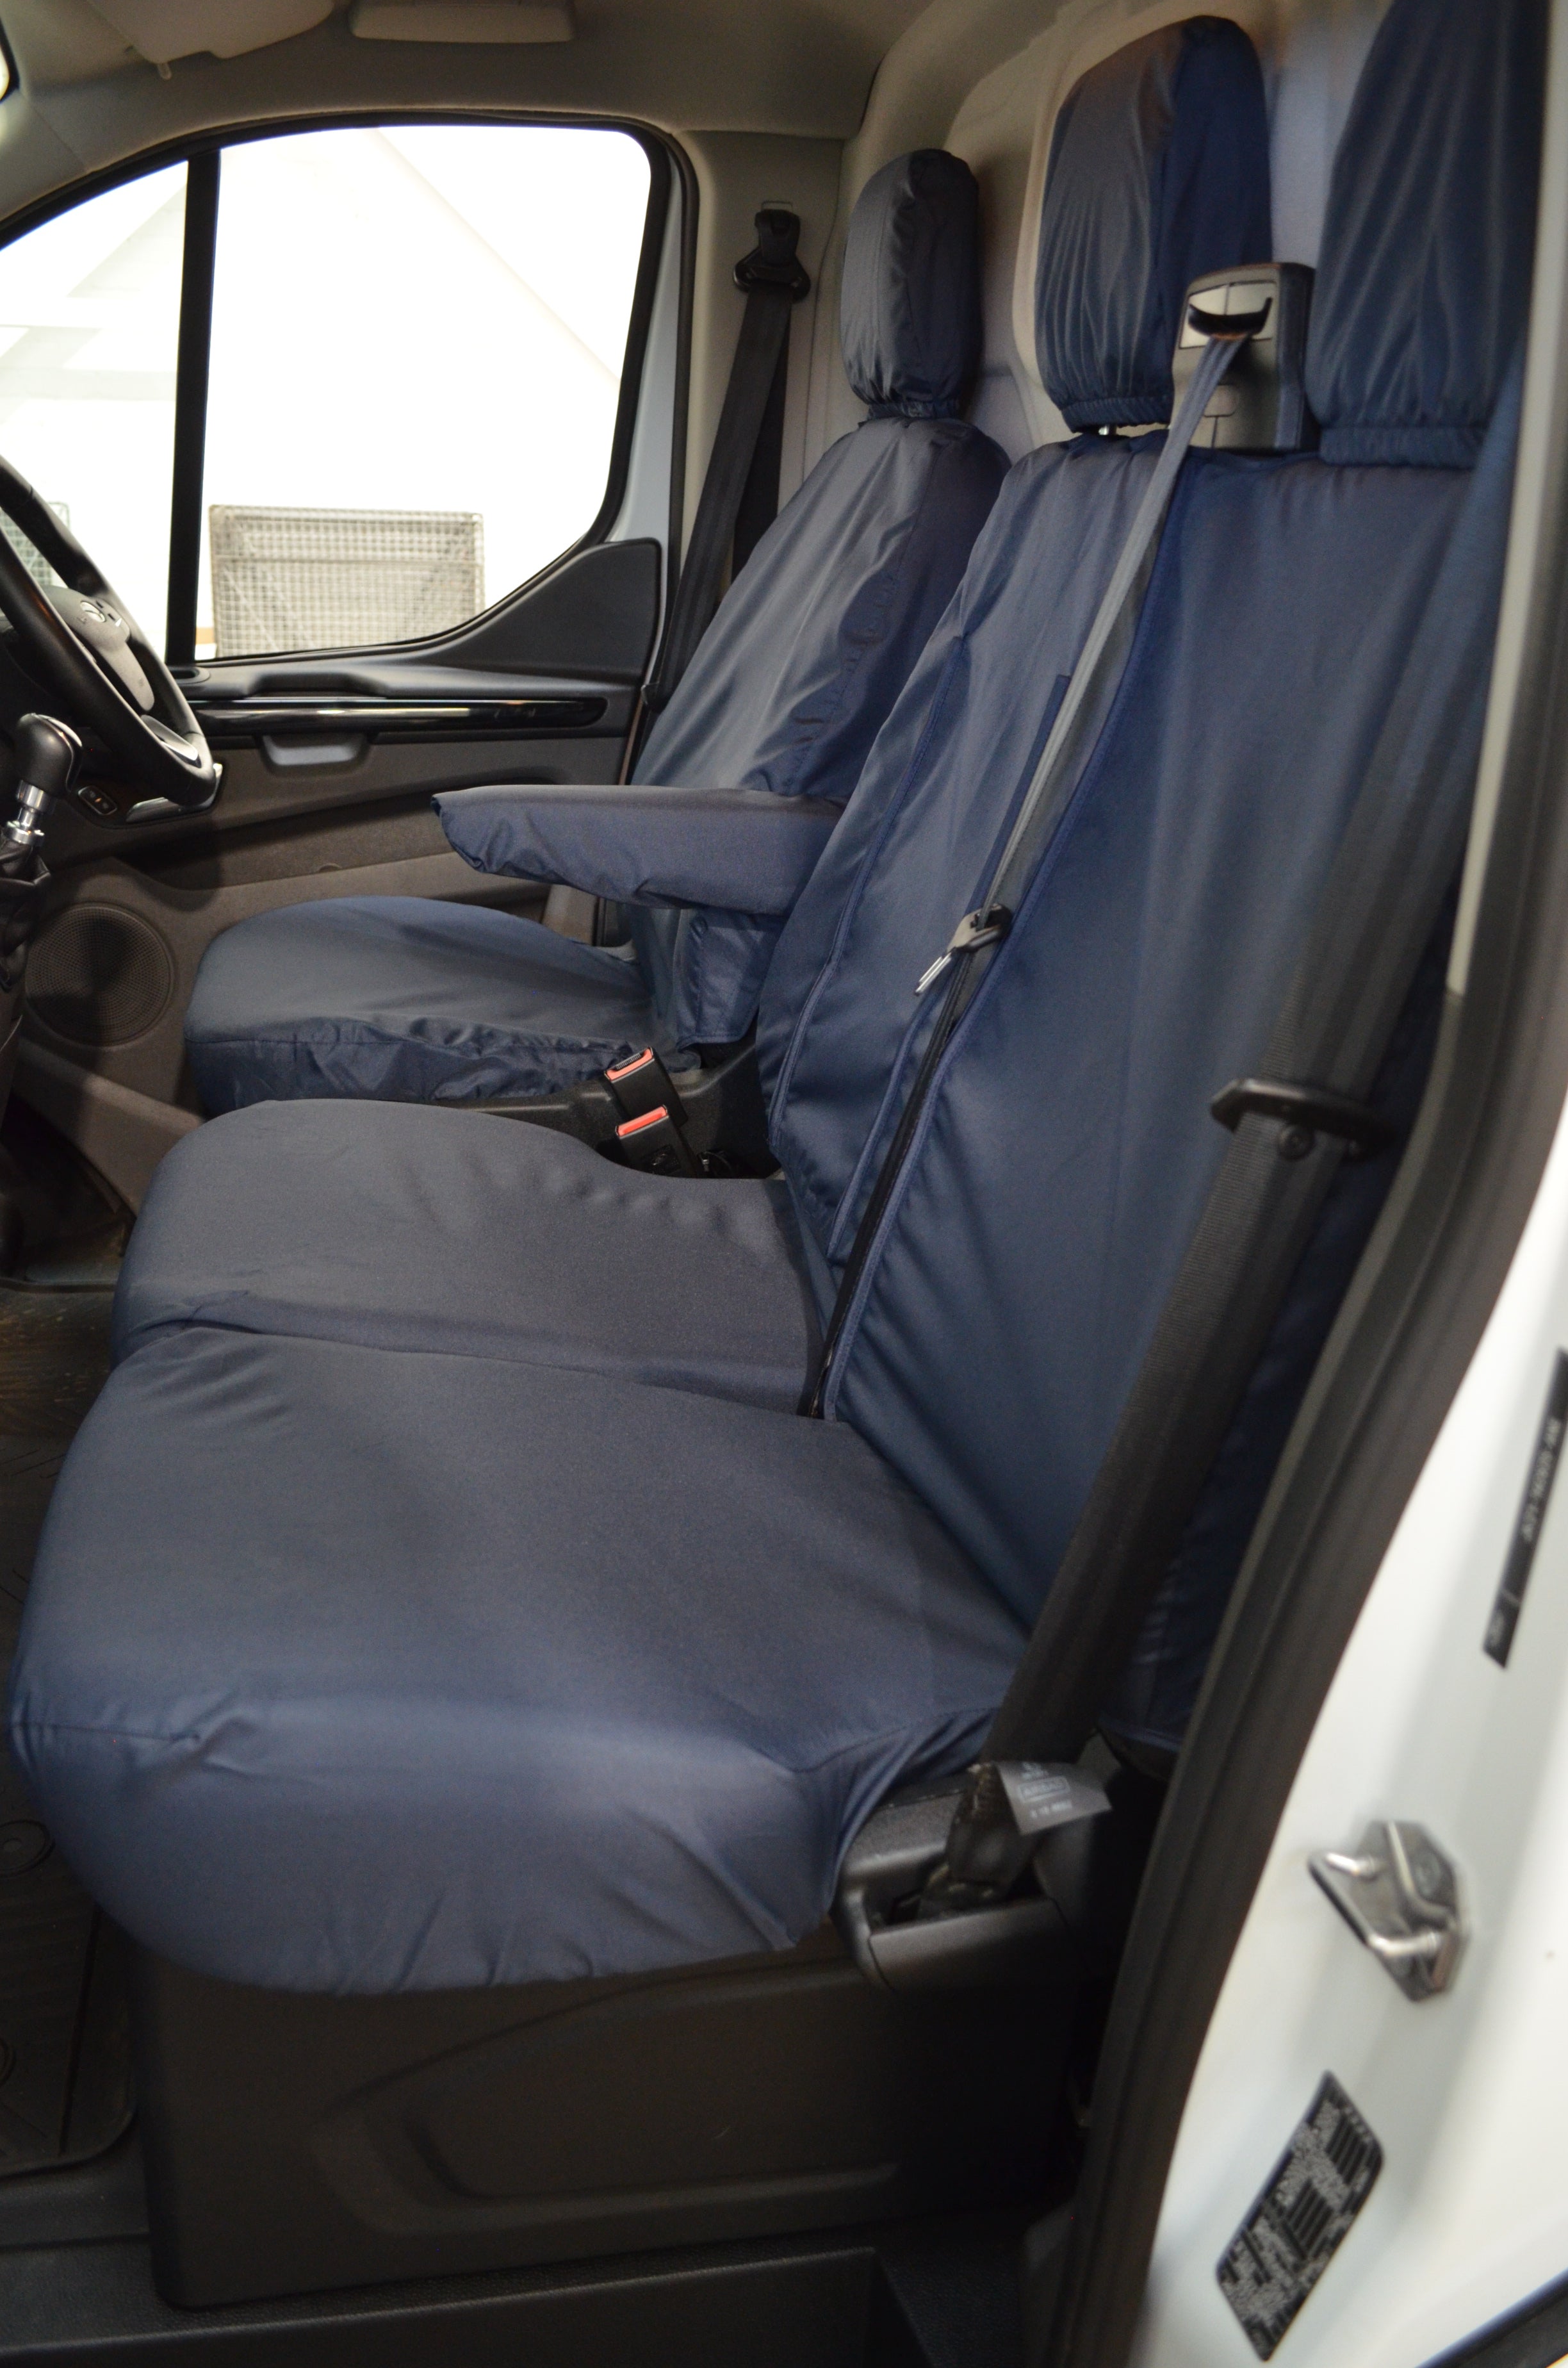 ESTEEM TAILOR MADE FABRIC CAR SEAT COVER TO SUIT NISSAN QASHQAI - The Seat  Cover Man